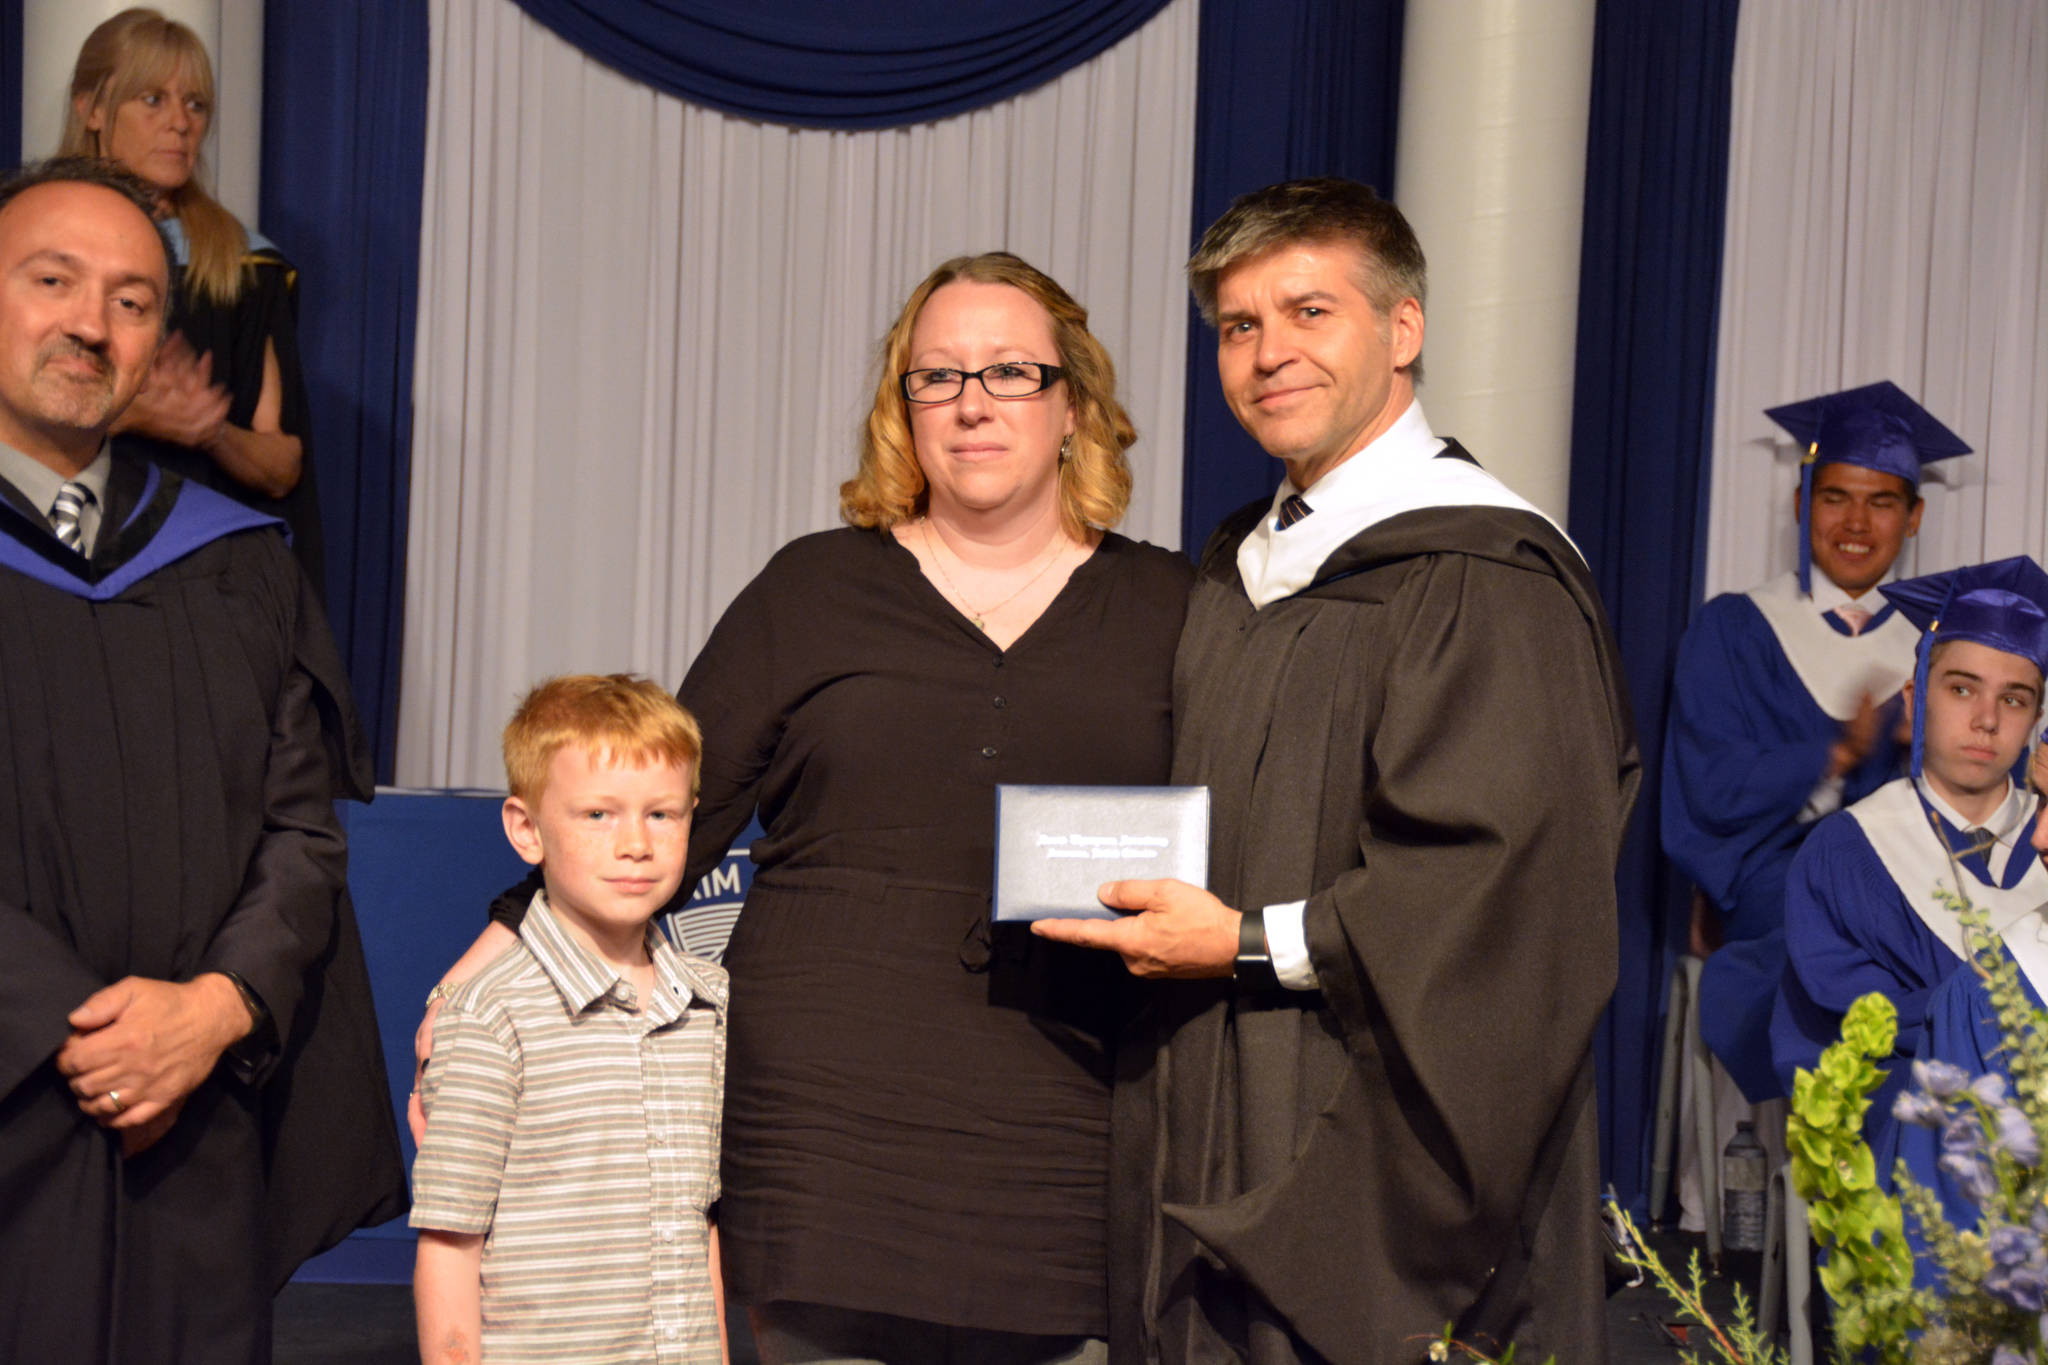 Photo by Lizzie Midyette                                In the end, Aislinn O’ Rourke decided to attend the DTSS commencement ceremony to accept her daughter’s diploma. Principal Darren Danyluk handed it to her, with Makayla’s younger brother Wyatt alongside.